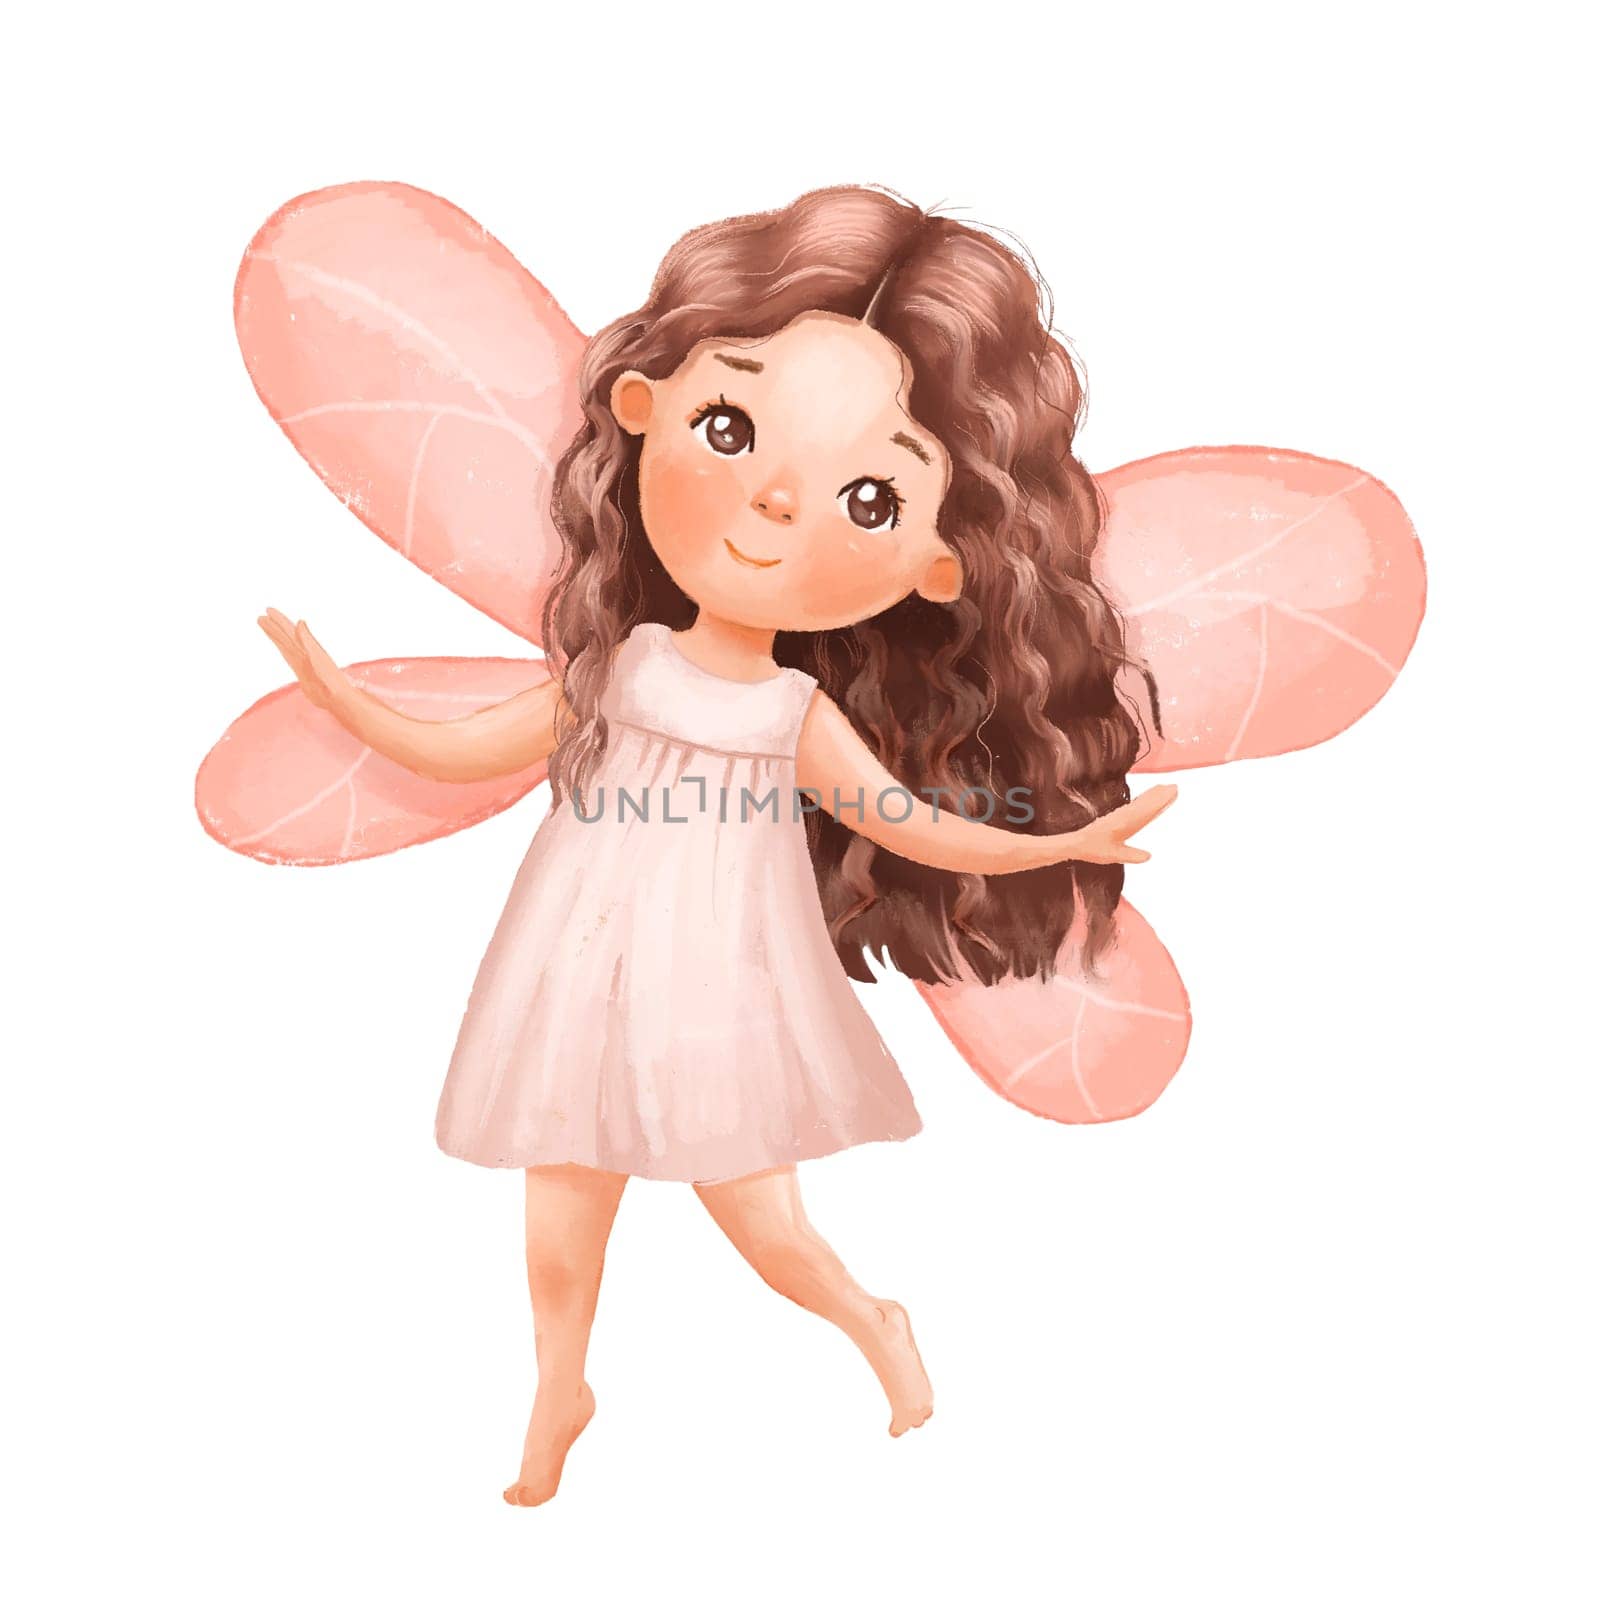 Cute cartoon fairy in pink dress dancing. Watercolor hand drawn illustration isolated on white by ElenaPlatova